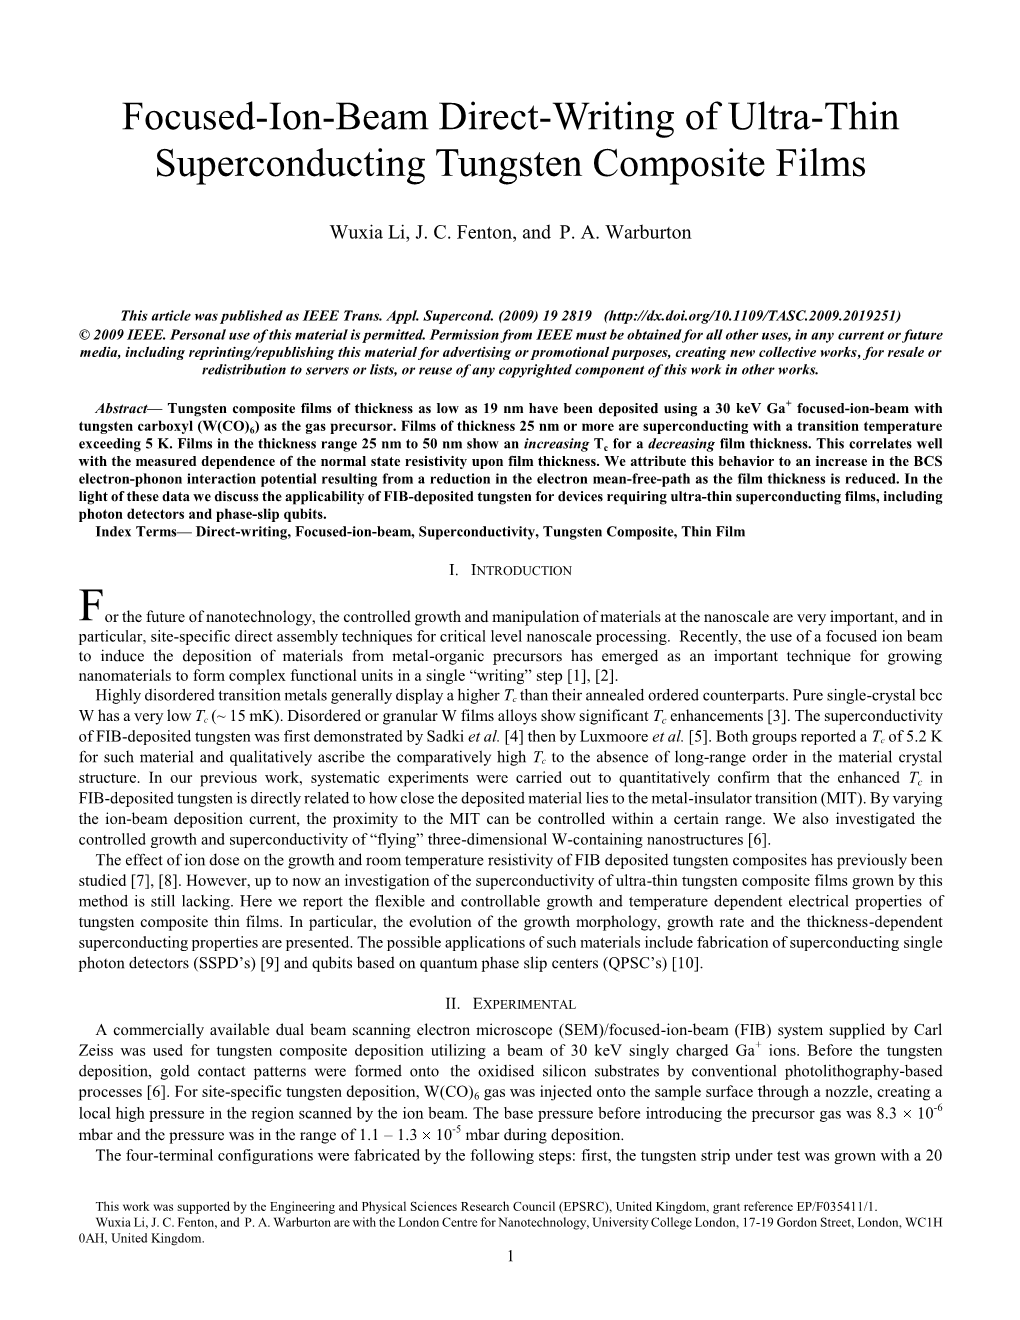 Focused-Ion-Beam Direct-Writing of Ultra-Thin Superconducting Tungsten Composite Films